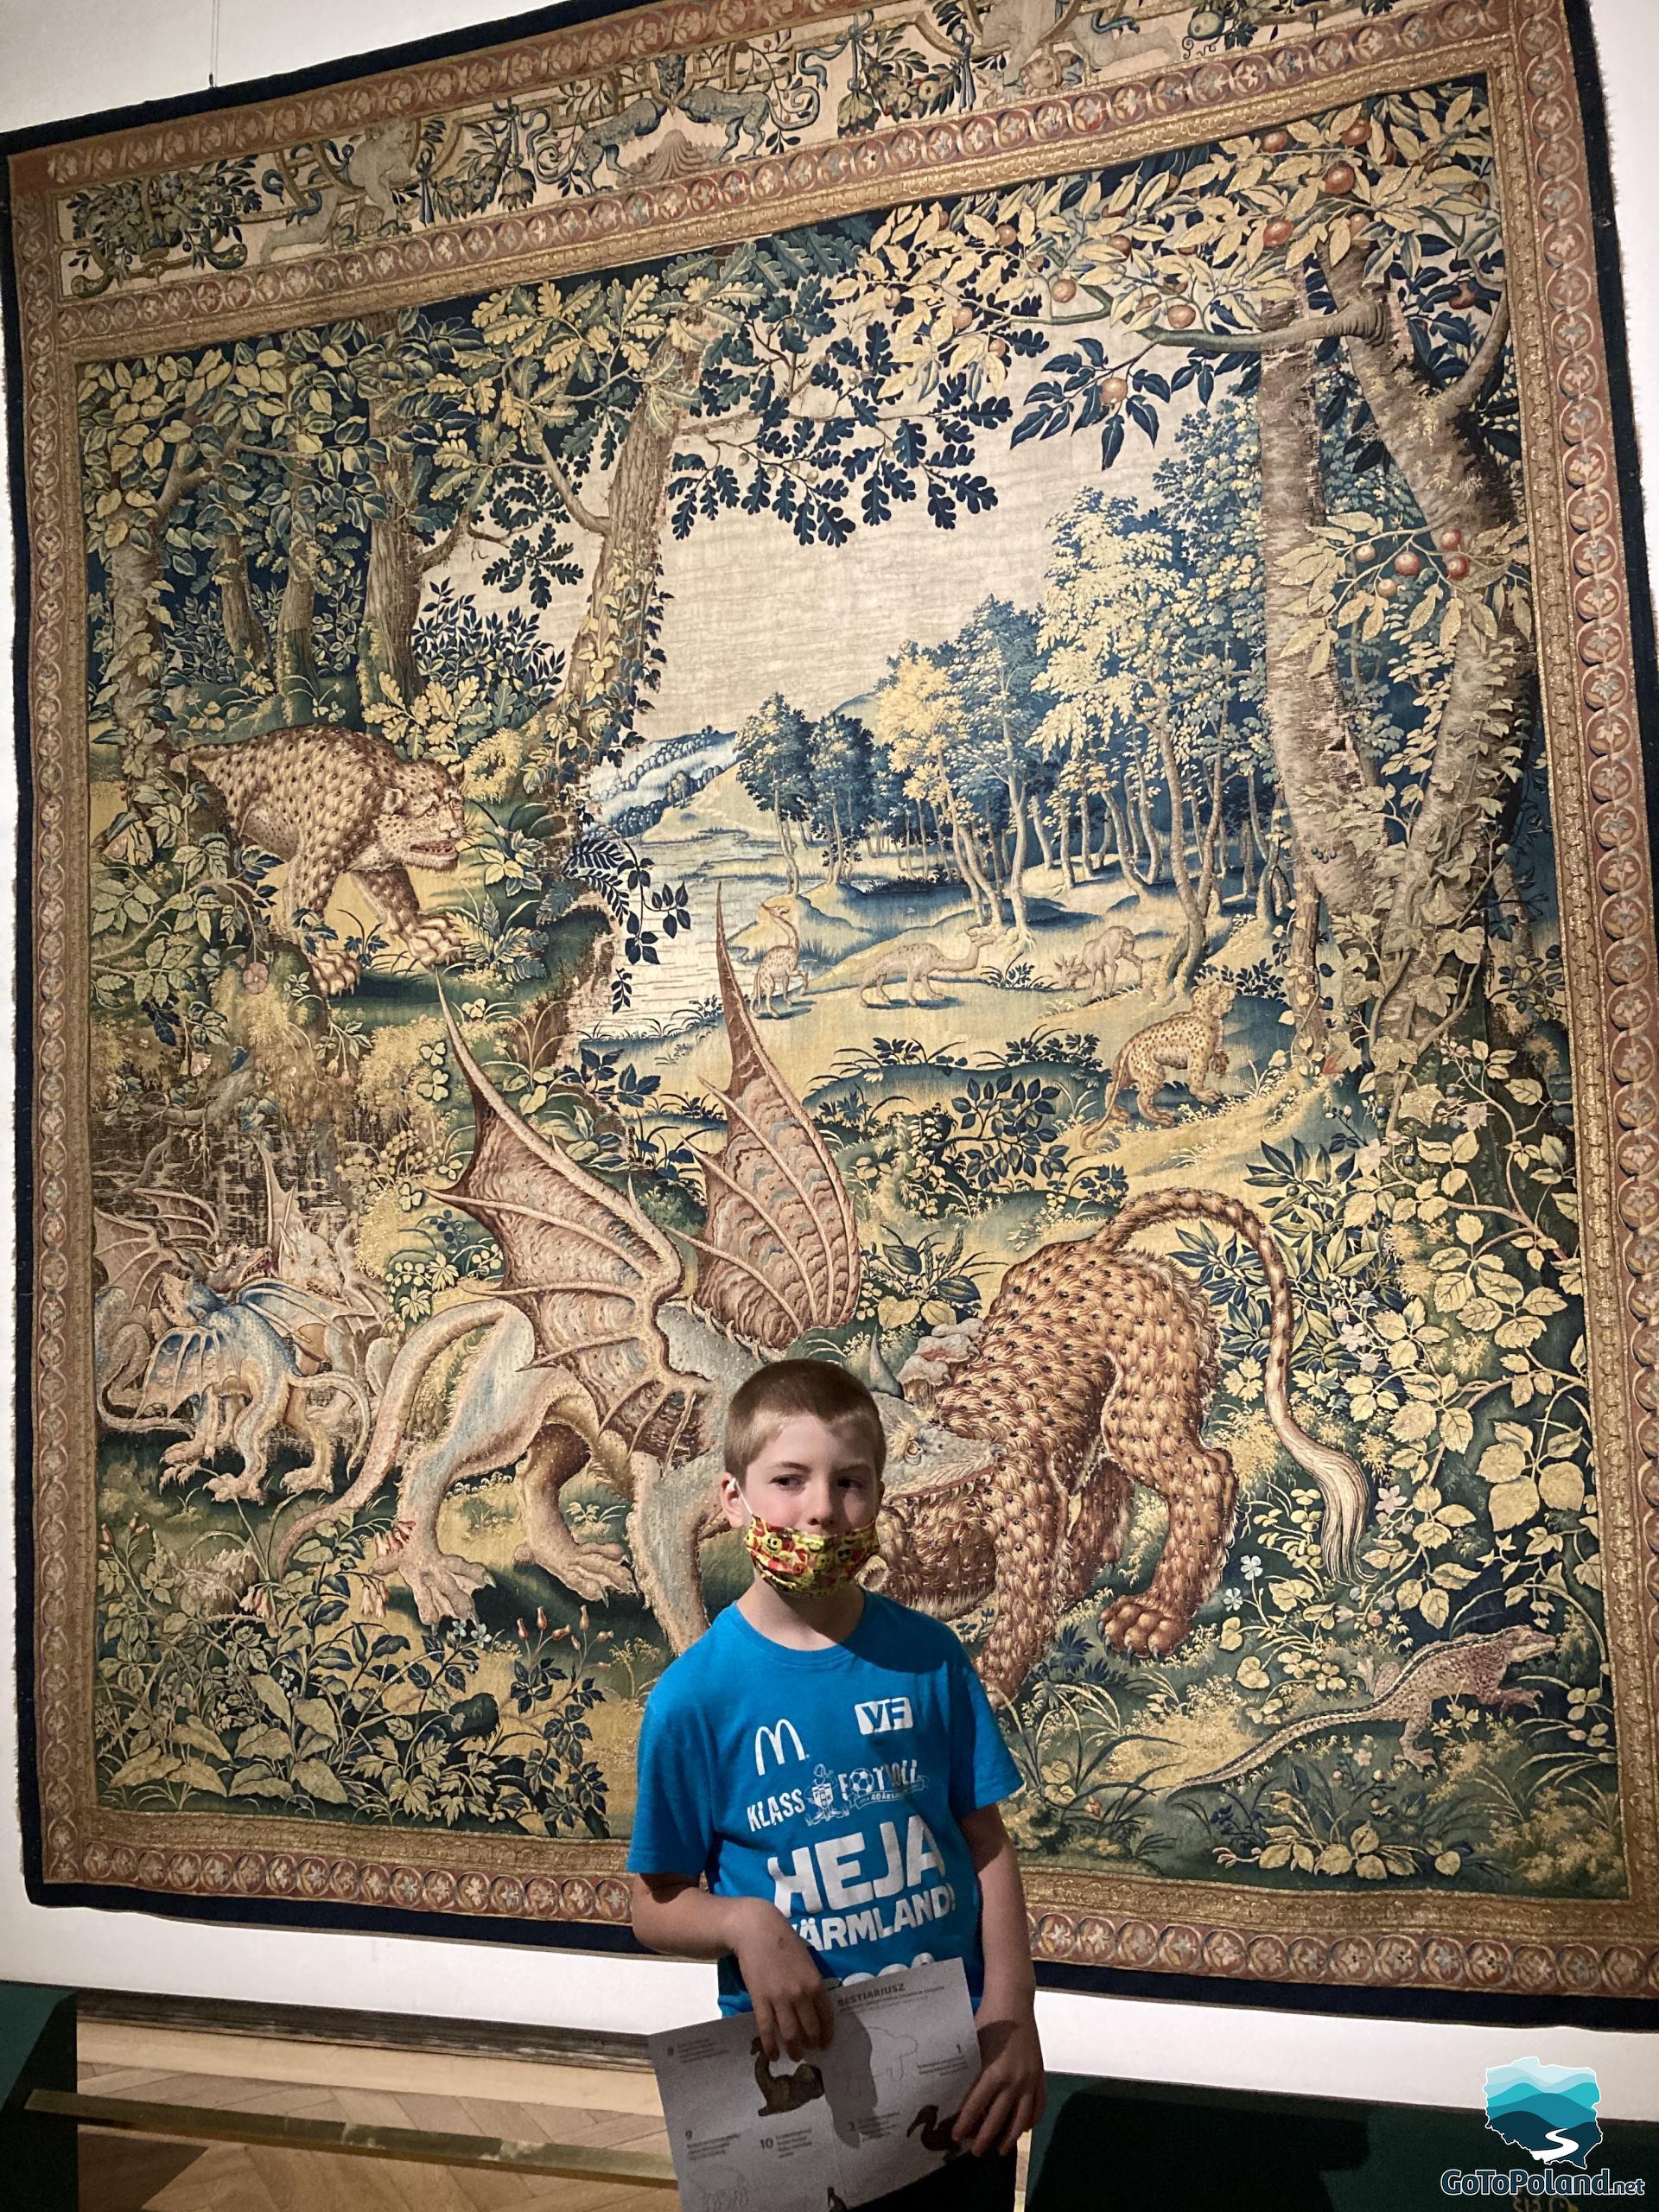 a boy is standing in front of the tapestry, on the tapestry are tress and wild animals